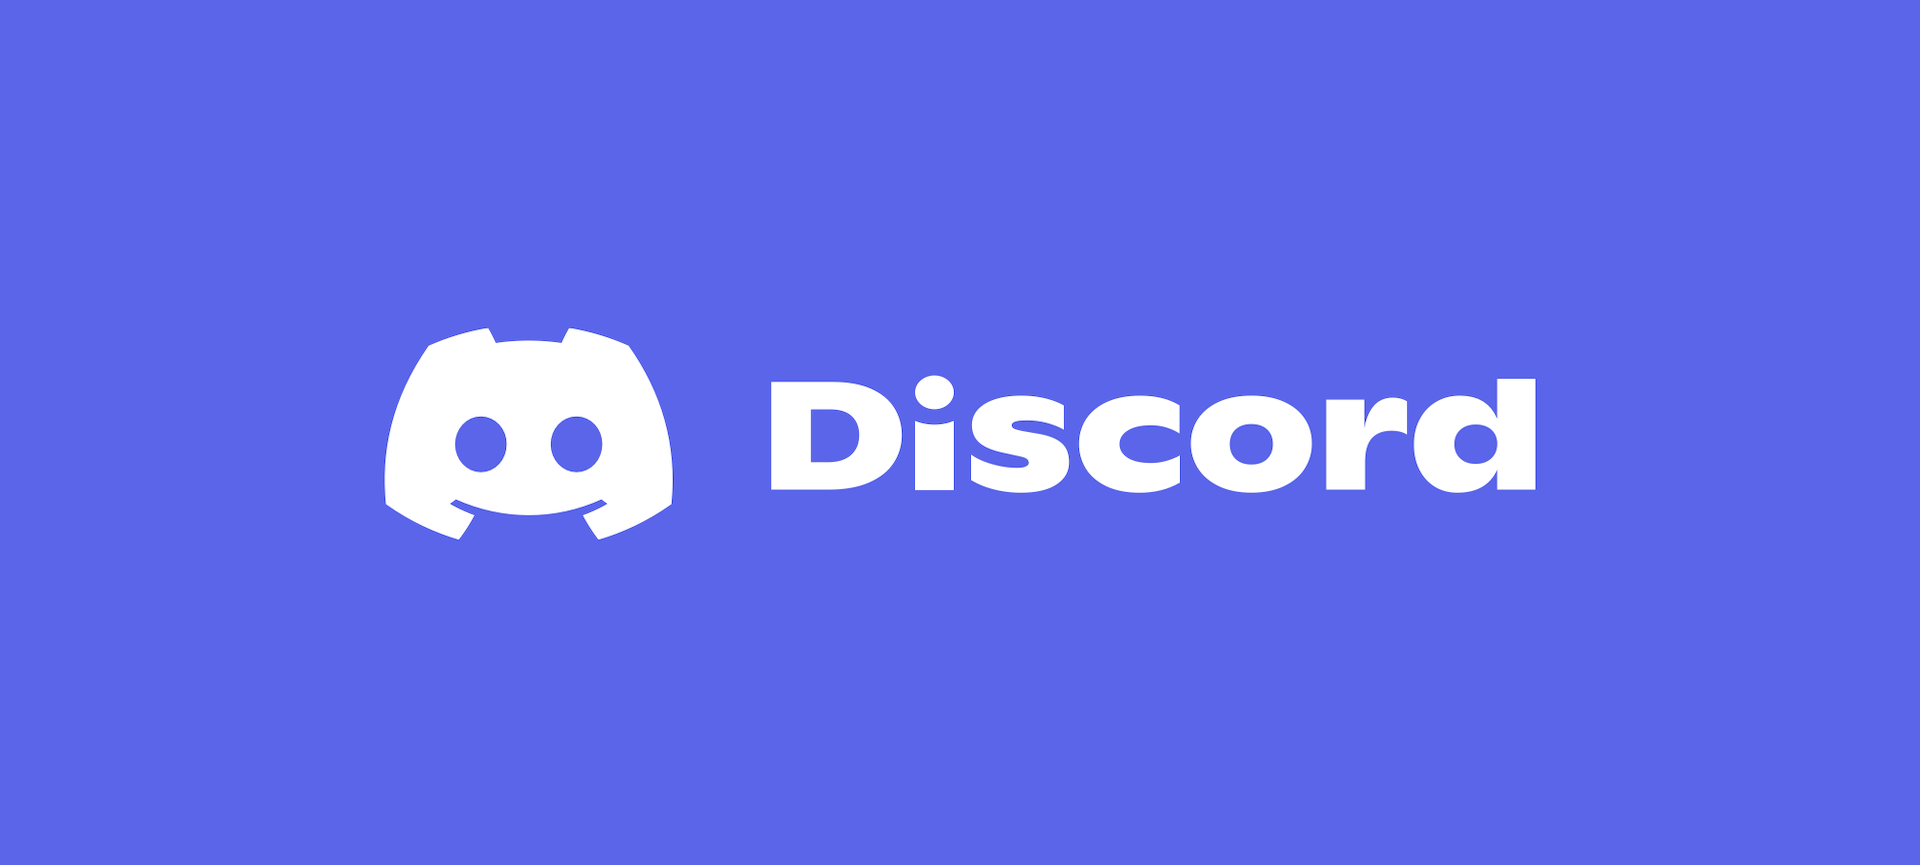 The Discord logo: a white game controller and the word "Discord" on a purple background